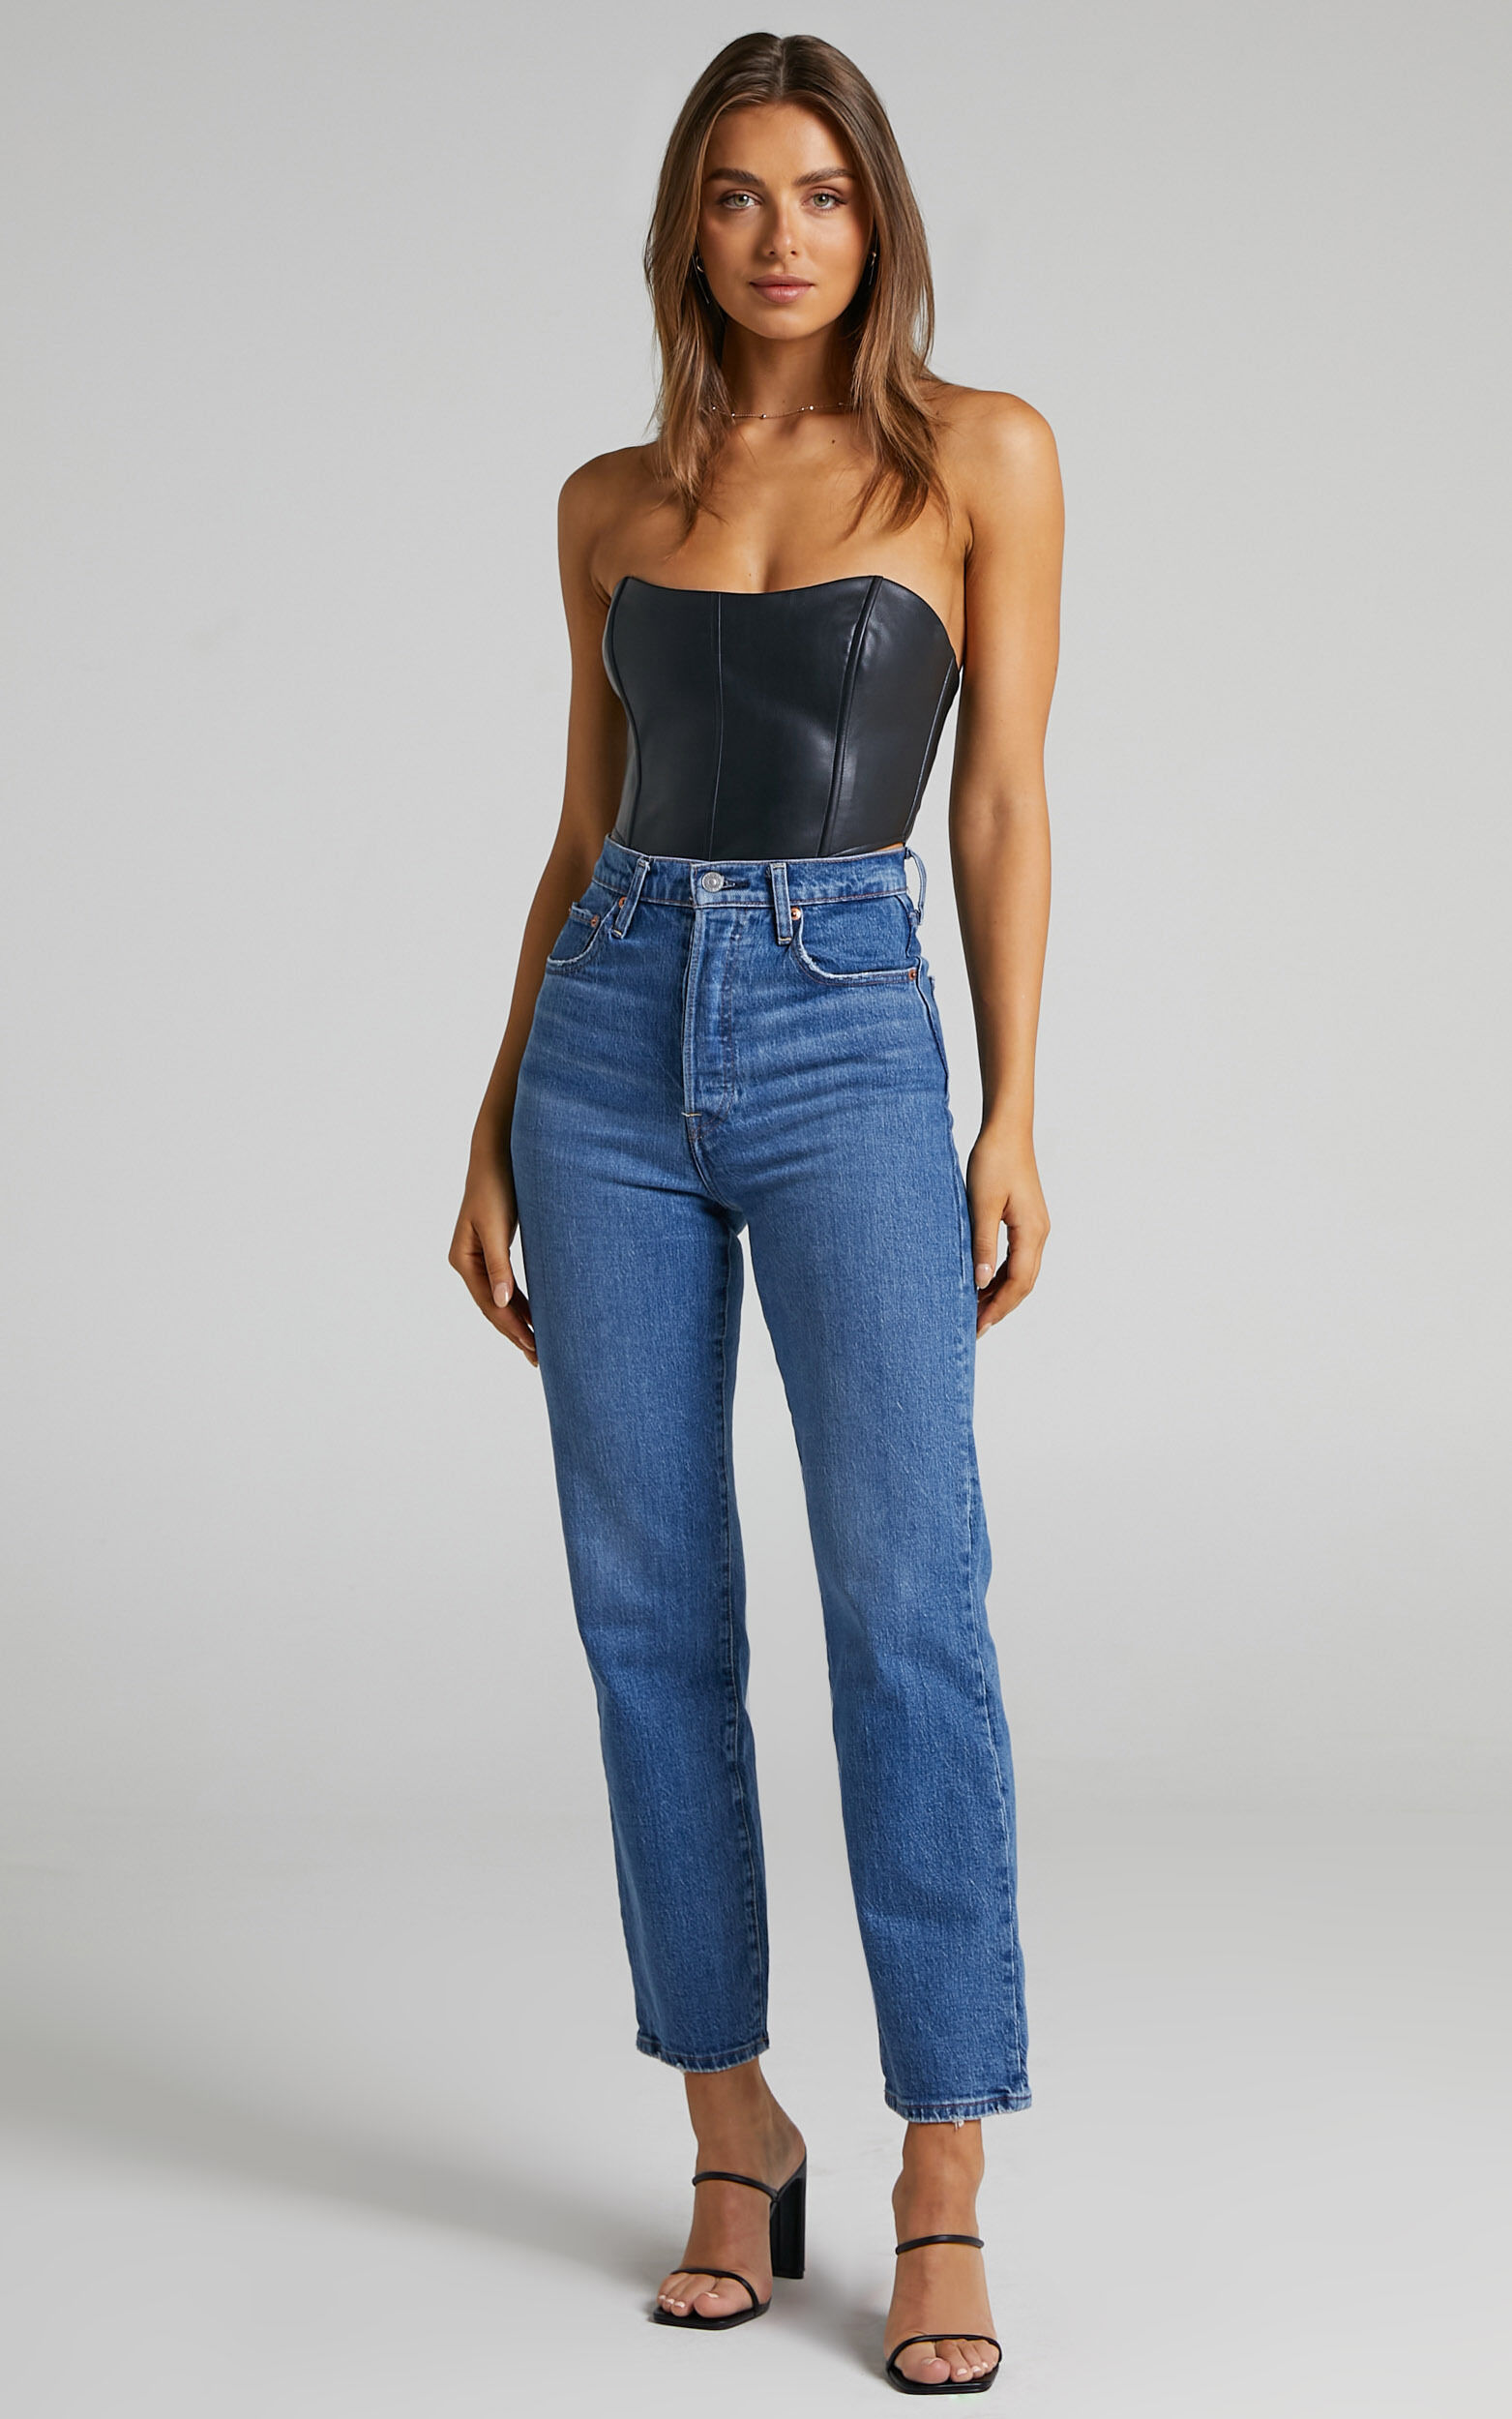 Levi's - High Waisted Ribcage Straight Ankle Jeans in Jazz Jive Together - 06, BLU1